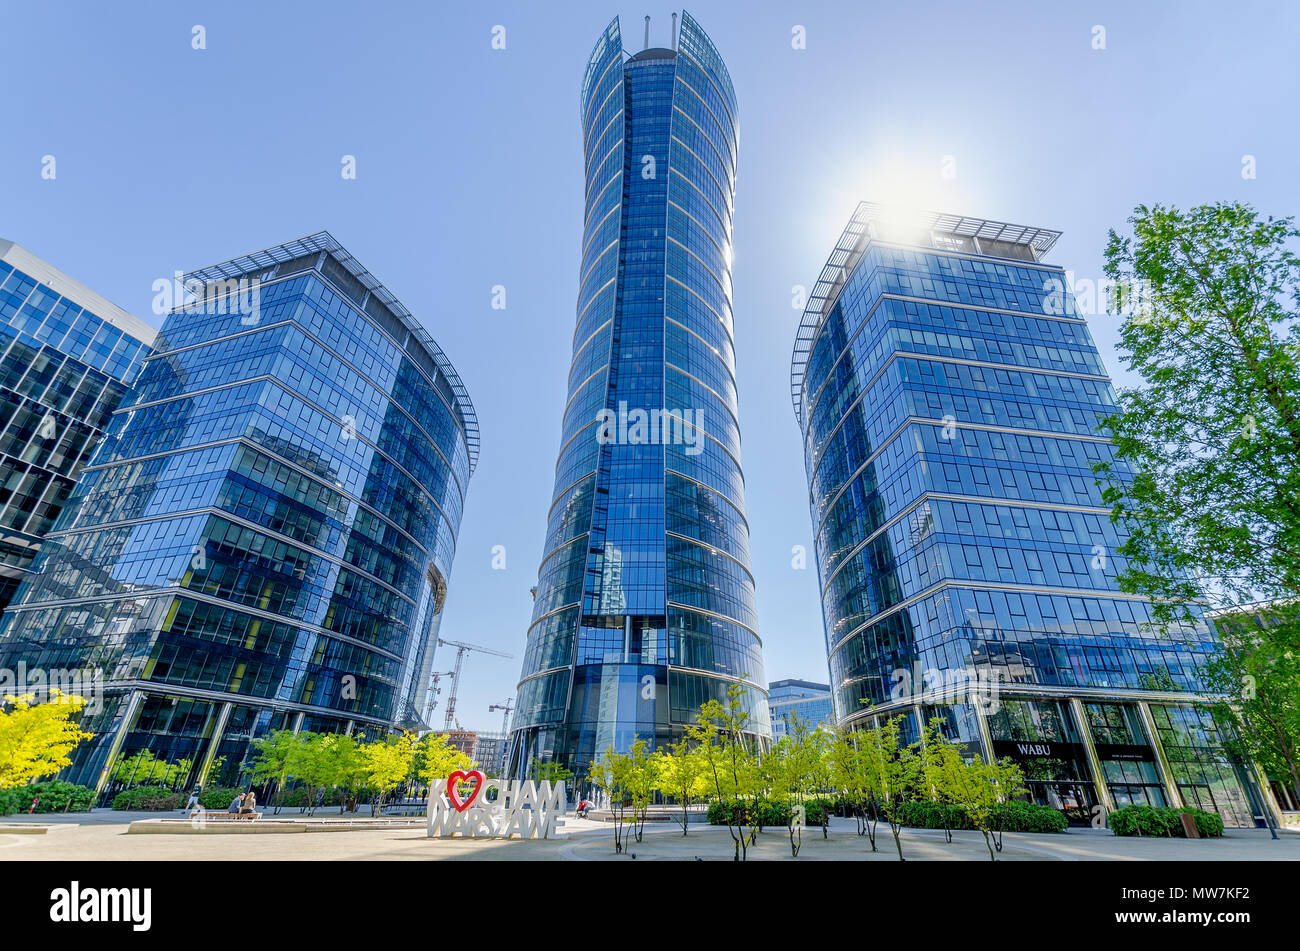 Warsaw, Poland. European square and Warsaw Spire, the tallest office building in Warsaw (220 m.) Stock Photo